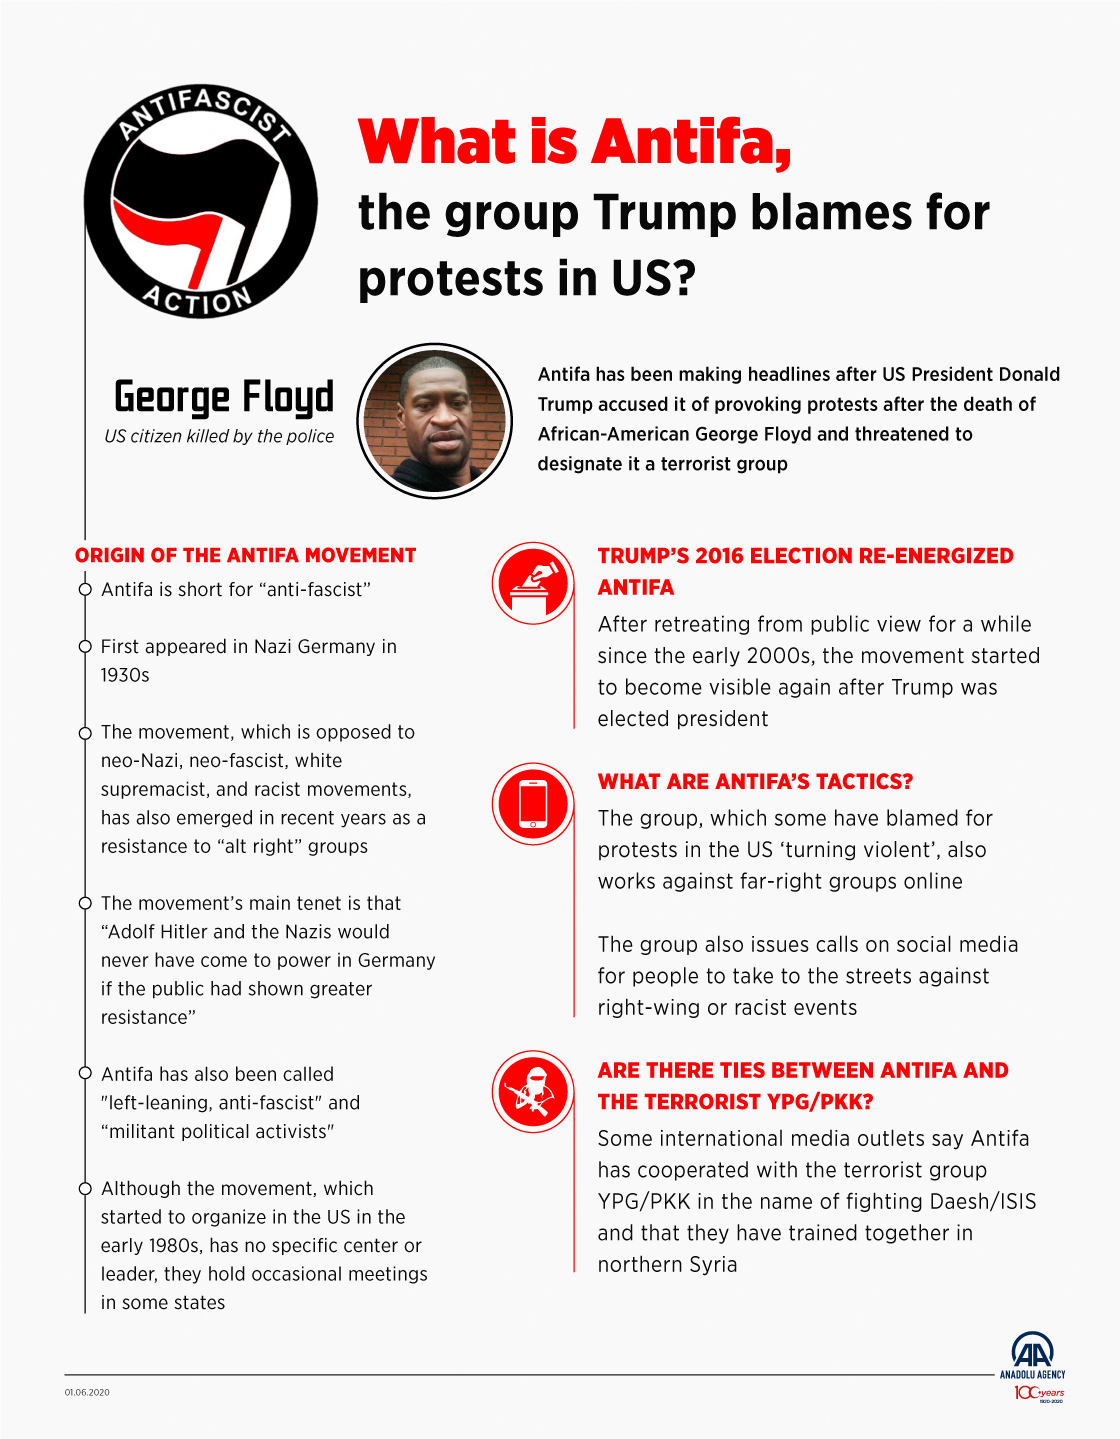 What is Antifa, the group Trump blames for protests in US?